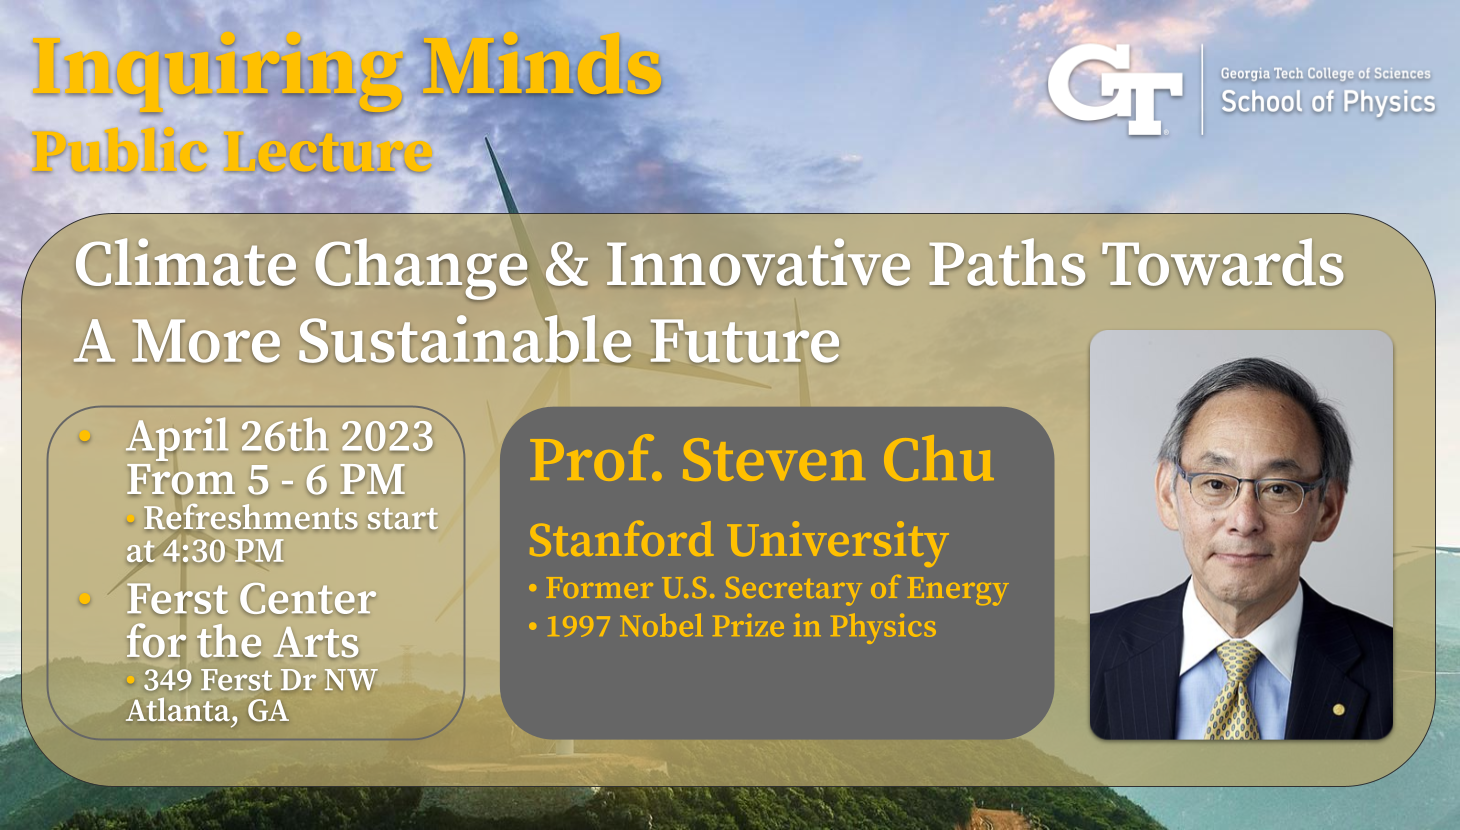 Inquiring Minds School of Physics Public Lecture with Professor Steven Chu, April 26th 5:00pm to 6:00pm. Refreshments served from 4:30pm to 5:00p.
